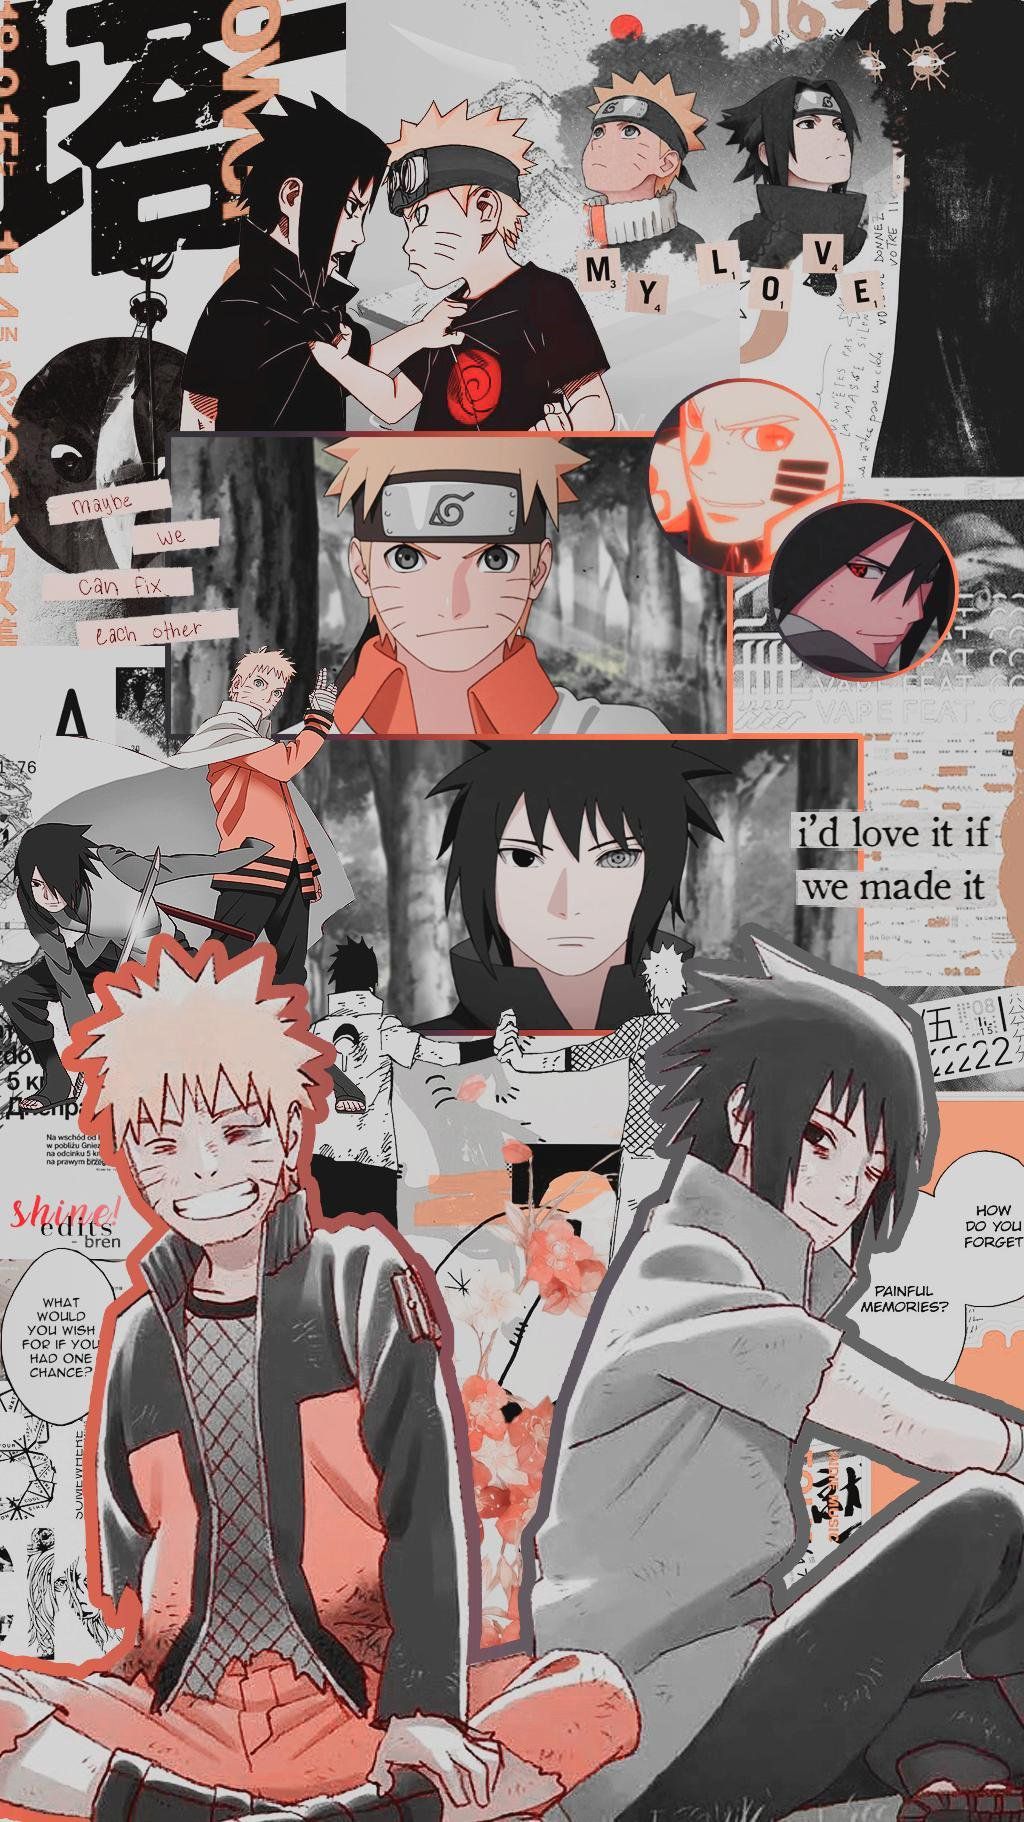 200+] Naruto Aesthetic Pictures